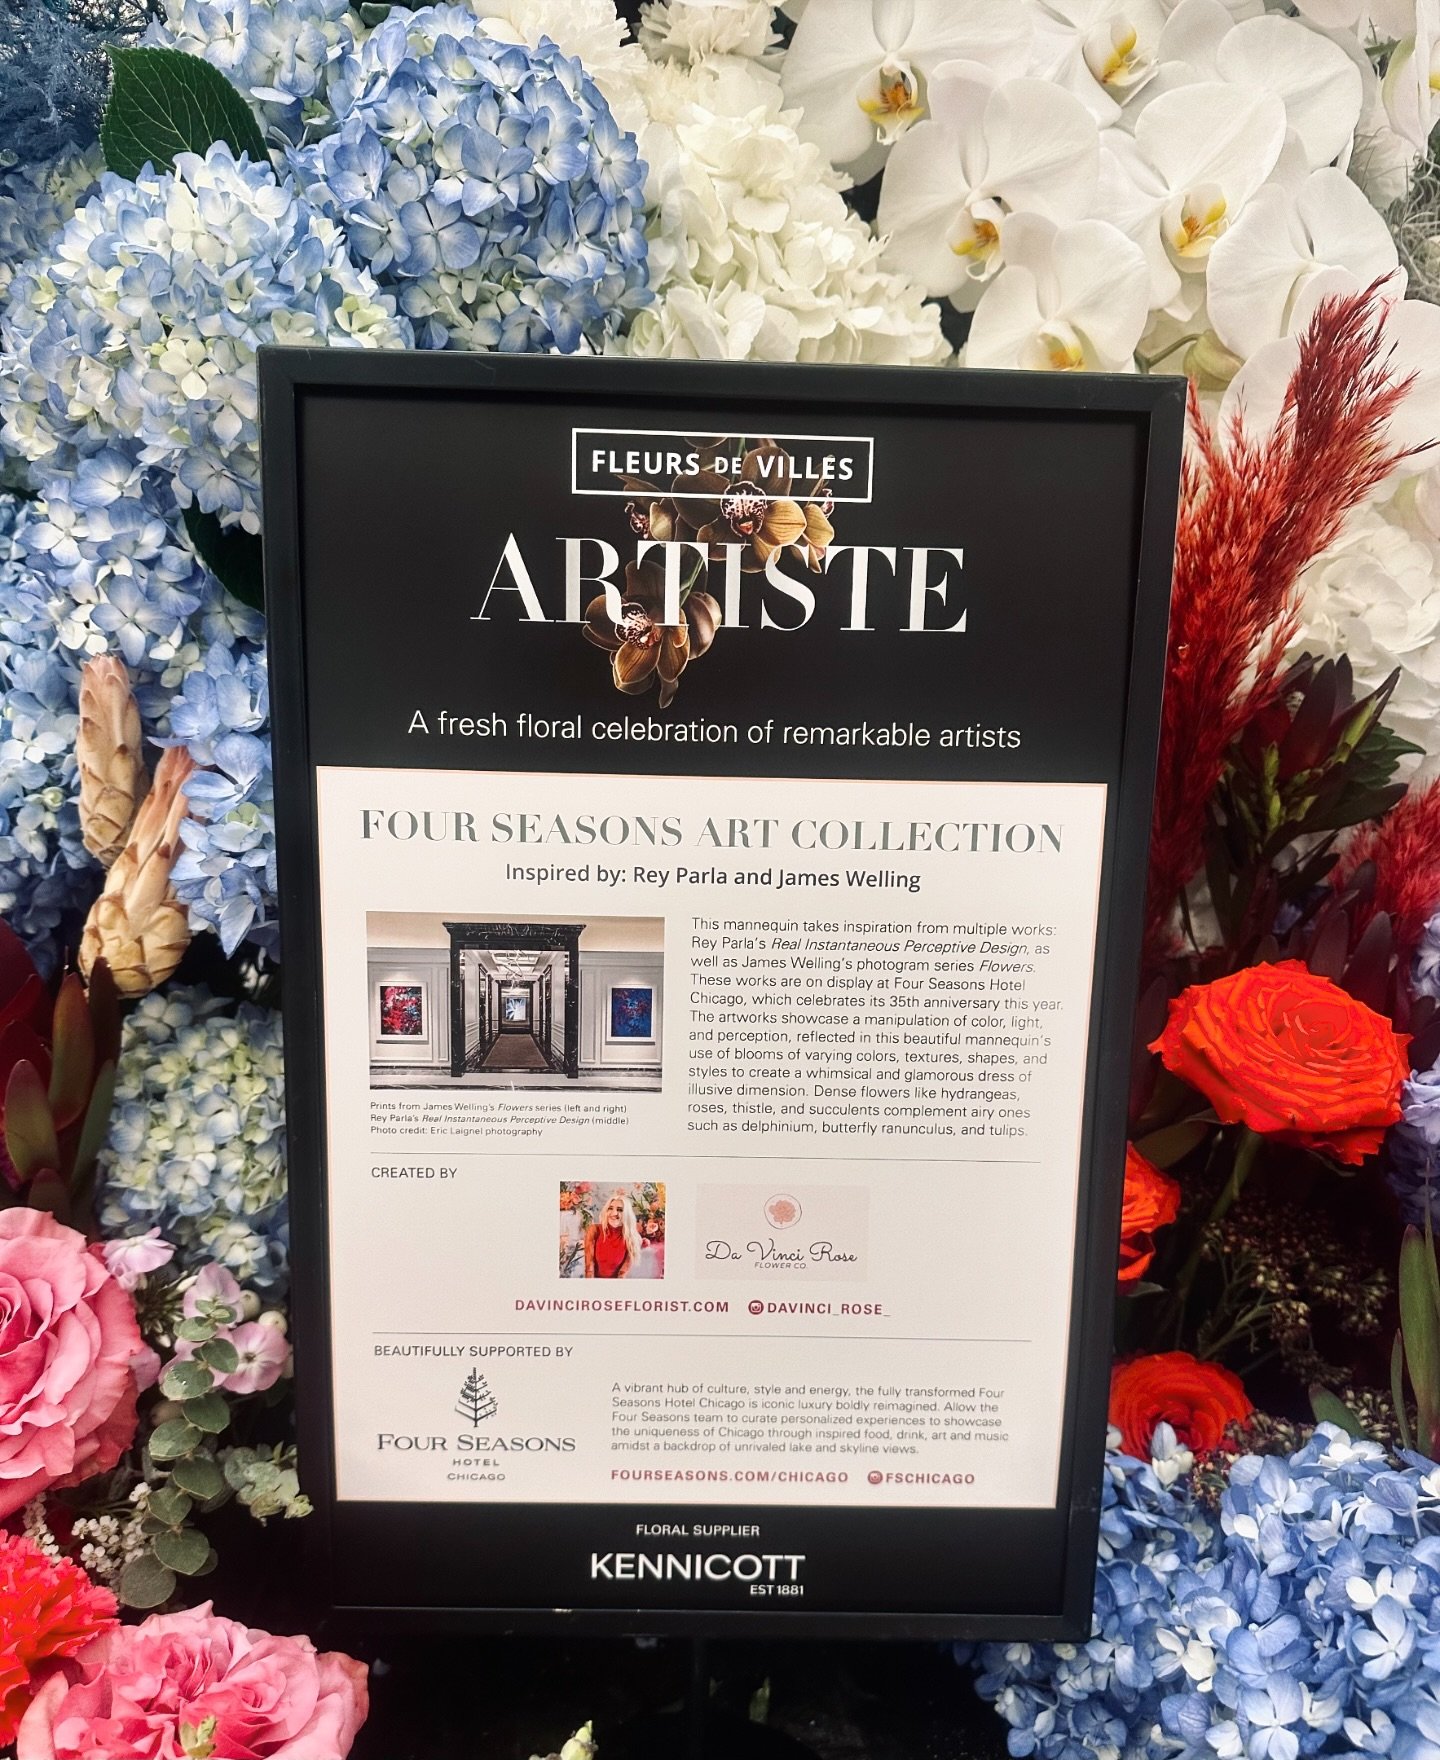 The @fleursdevilles floral fashion showcase starts today!! Join us @900shops to see the most amazing floral designs. Don't miss ours on the second floor by Bloomingdales.